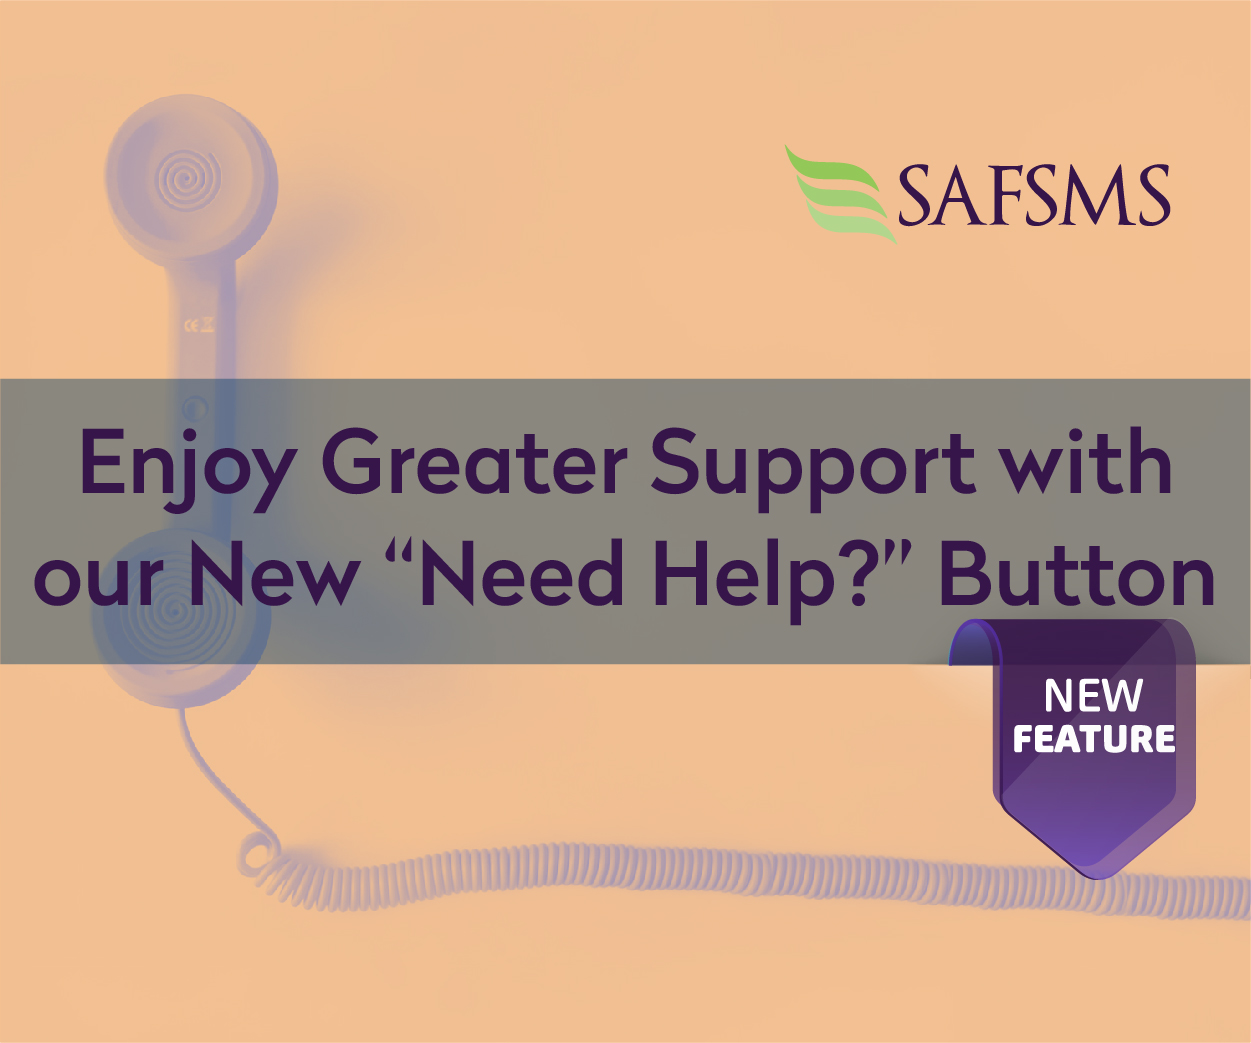 Enjoy Greater Support with our New “Need Help?” Button